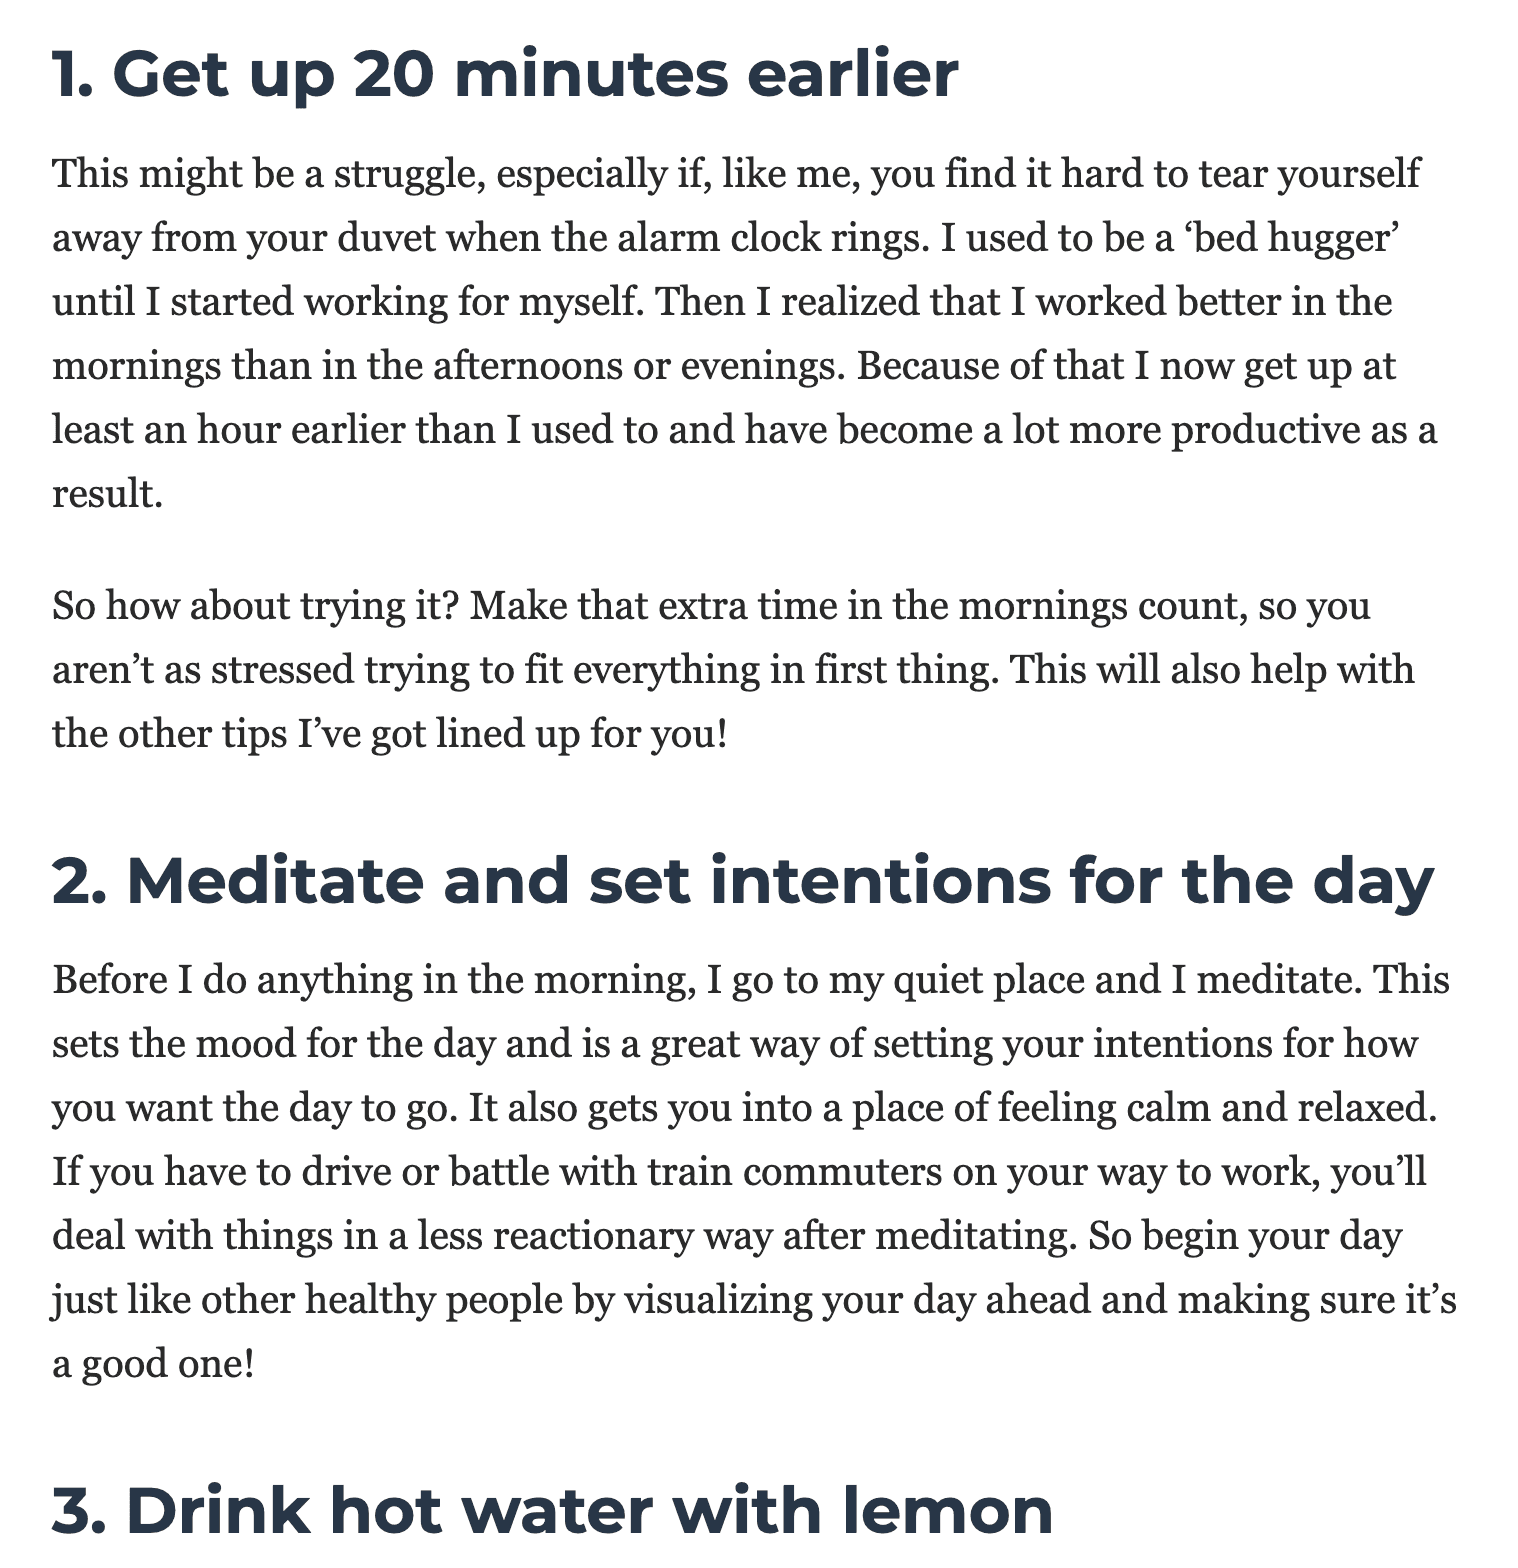 Suggestions for a healthy morning before work